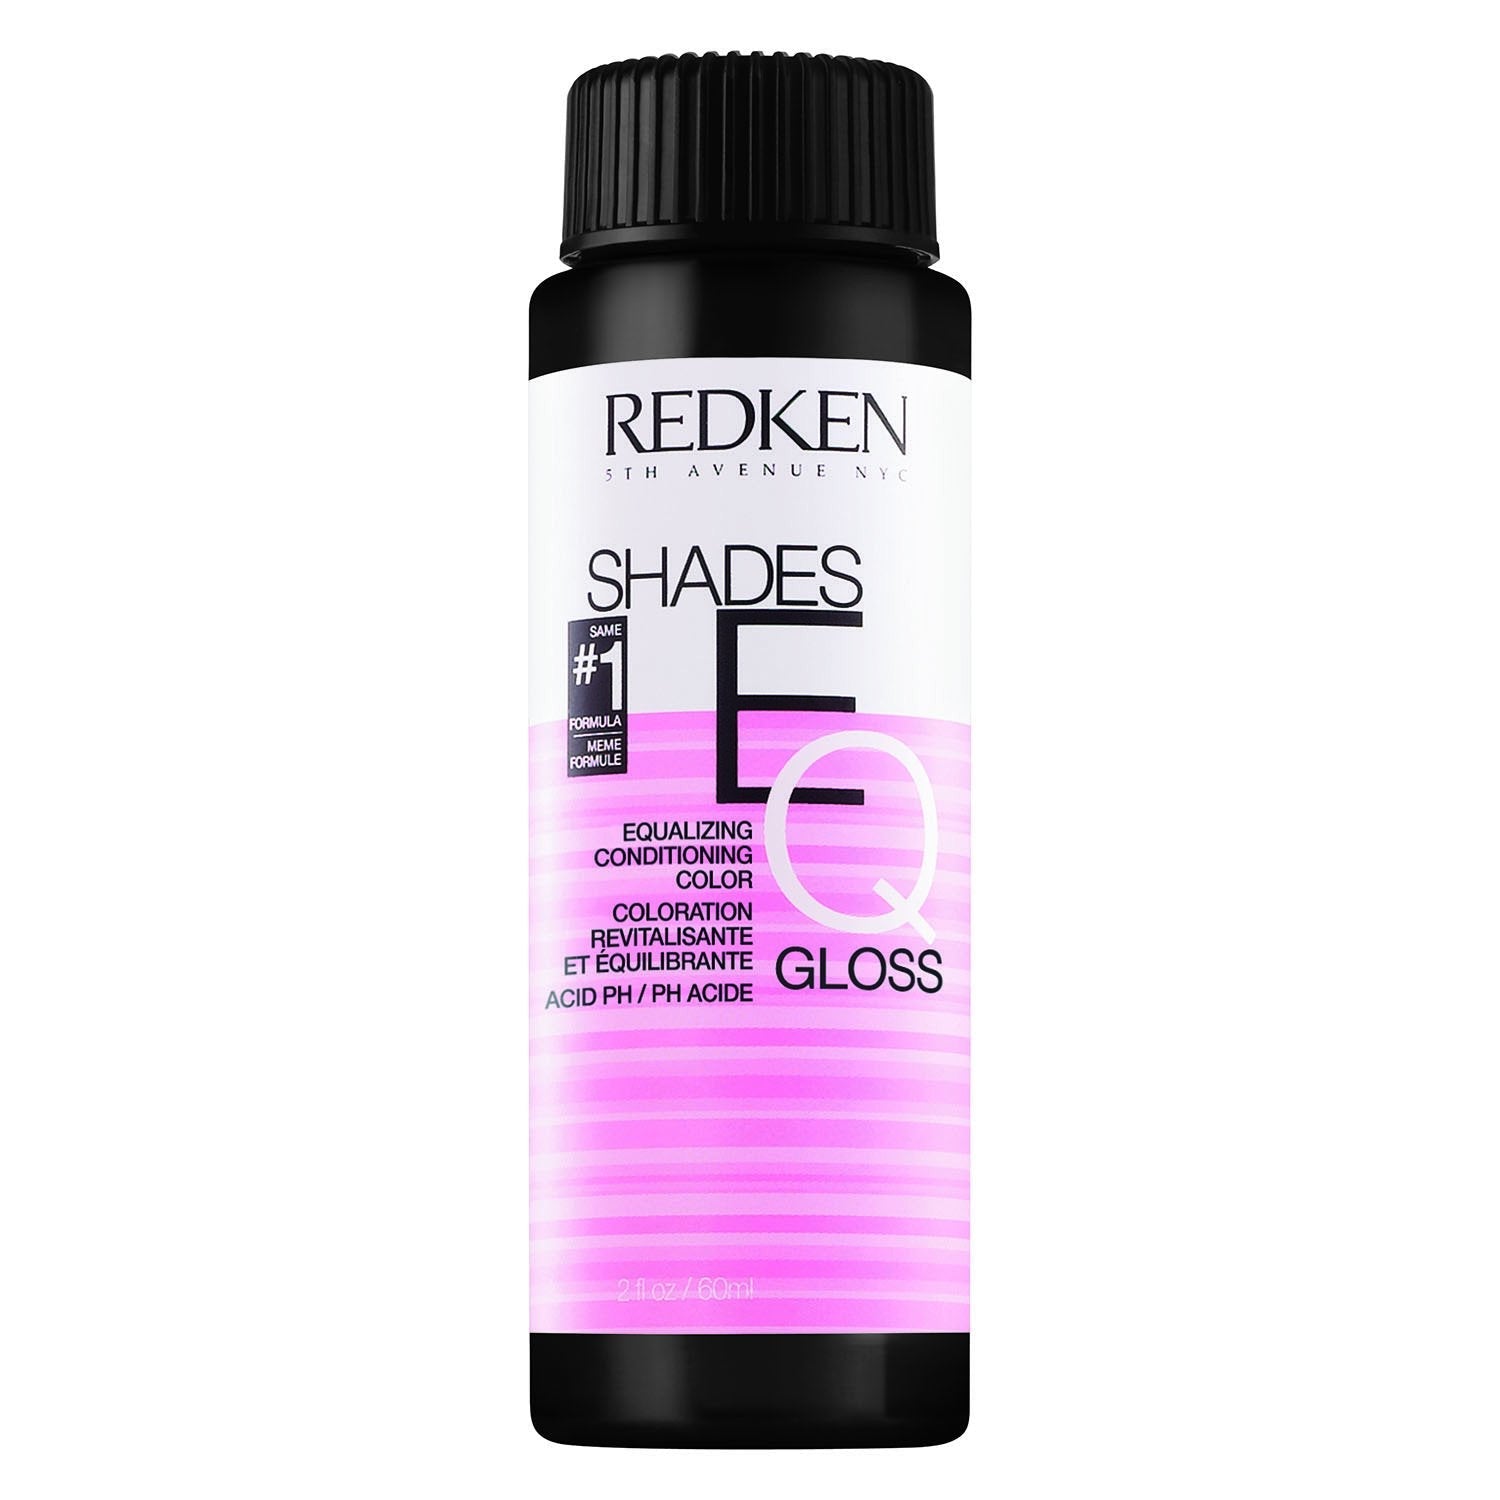 Redken® Shades EQ CHICORY 04N - HairBeautyInk